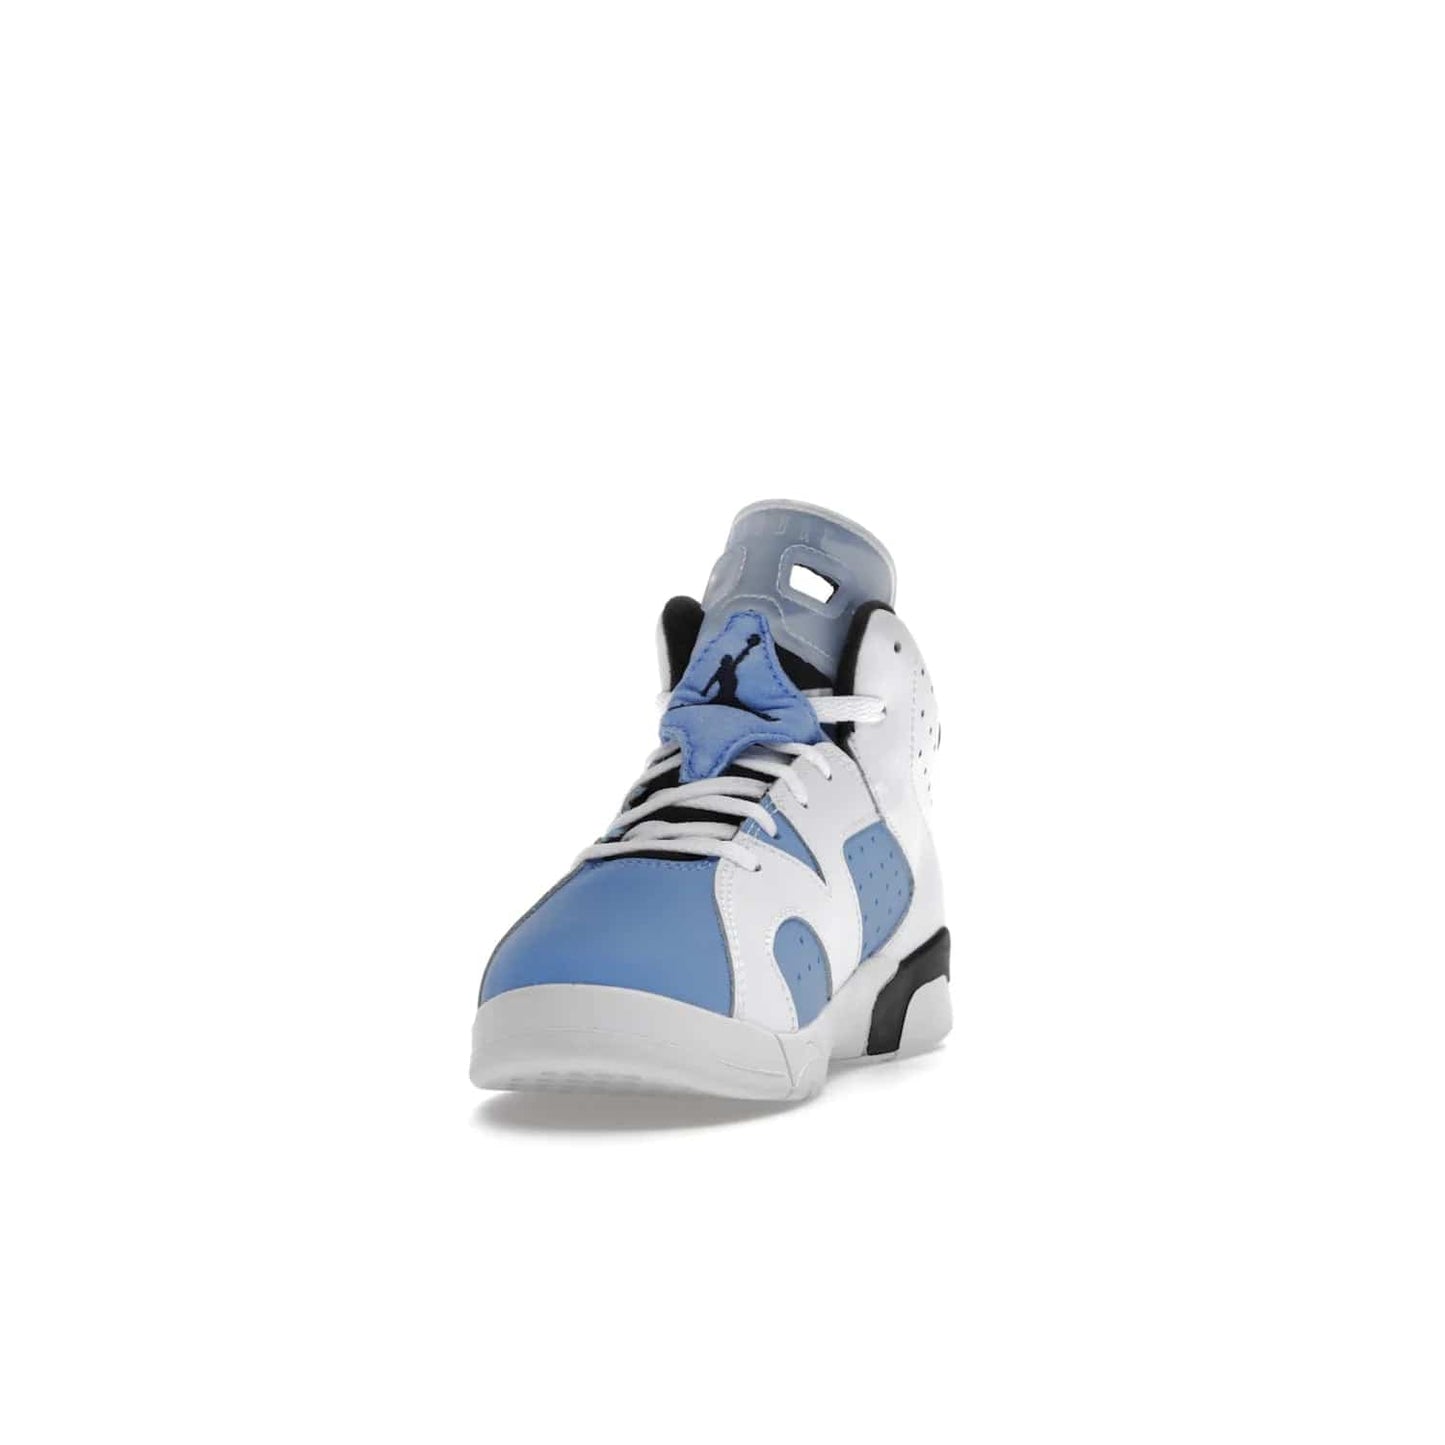 Jordan 6 Retro UNC White (PS) - Image 12 - Only at www.BallersClubKickz.com - The Air Jordan 6 Retro UNC White PS celebrates Michael Jordan's alma mater, the University of North Carolina. It features a classic color-blocking of the iconic Jordan 6 Carmine and a stitched Jordan Team patch. This must-have sneaker released on April 27th, 2022. Referencing the university colors, get this shoe for a stylish and timeless style with university pride.